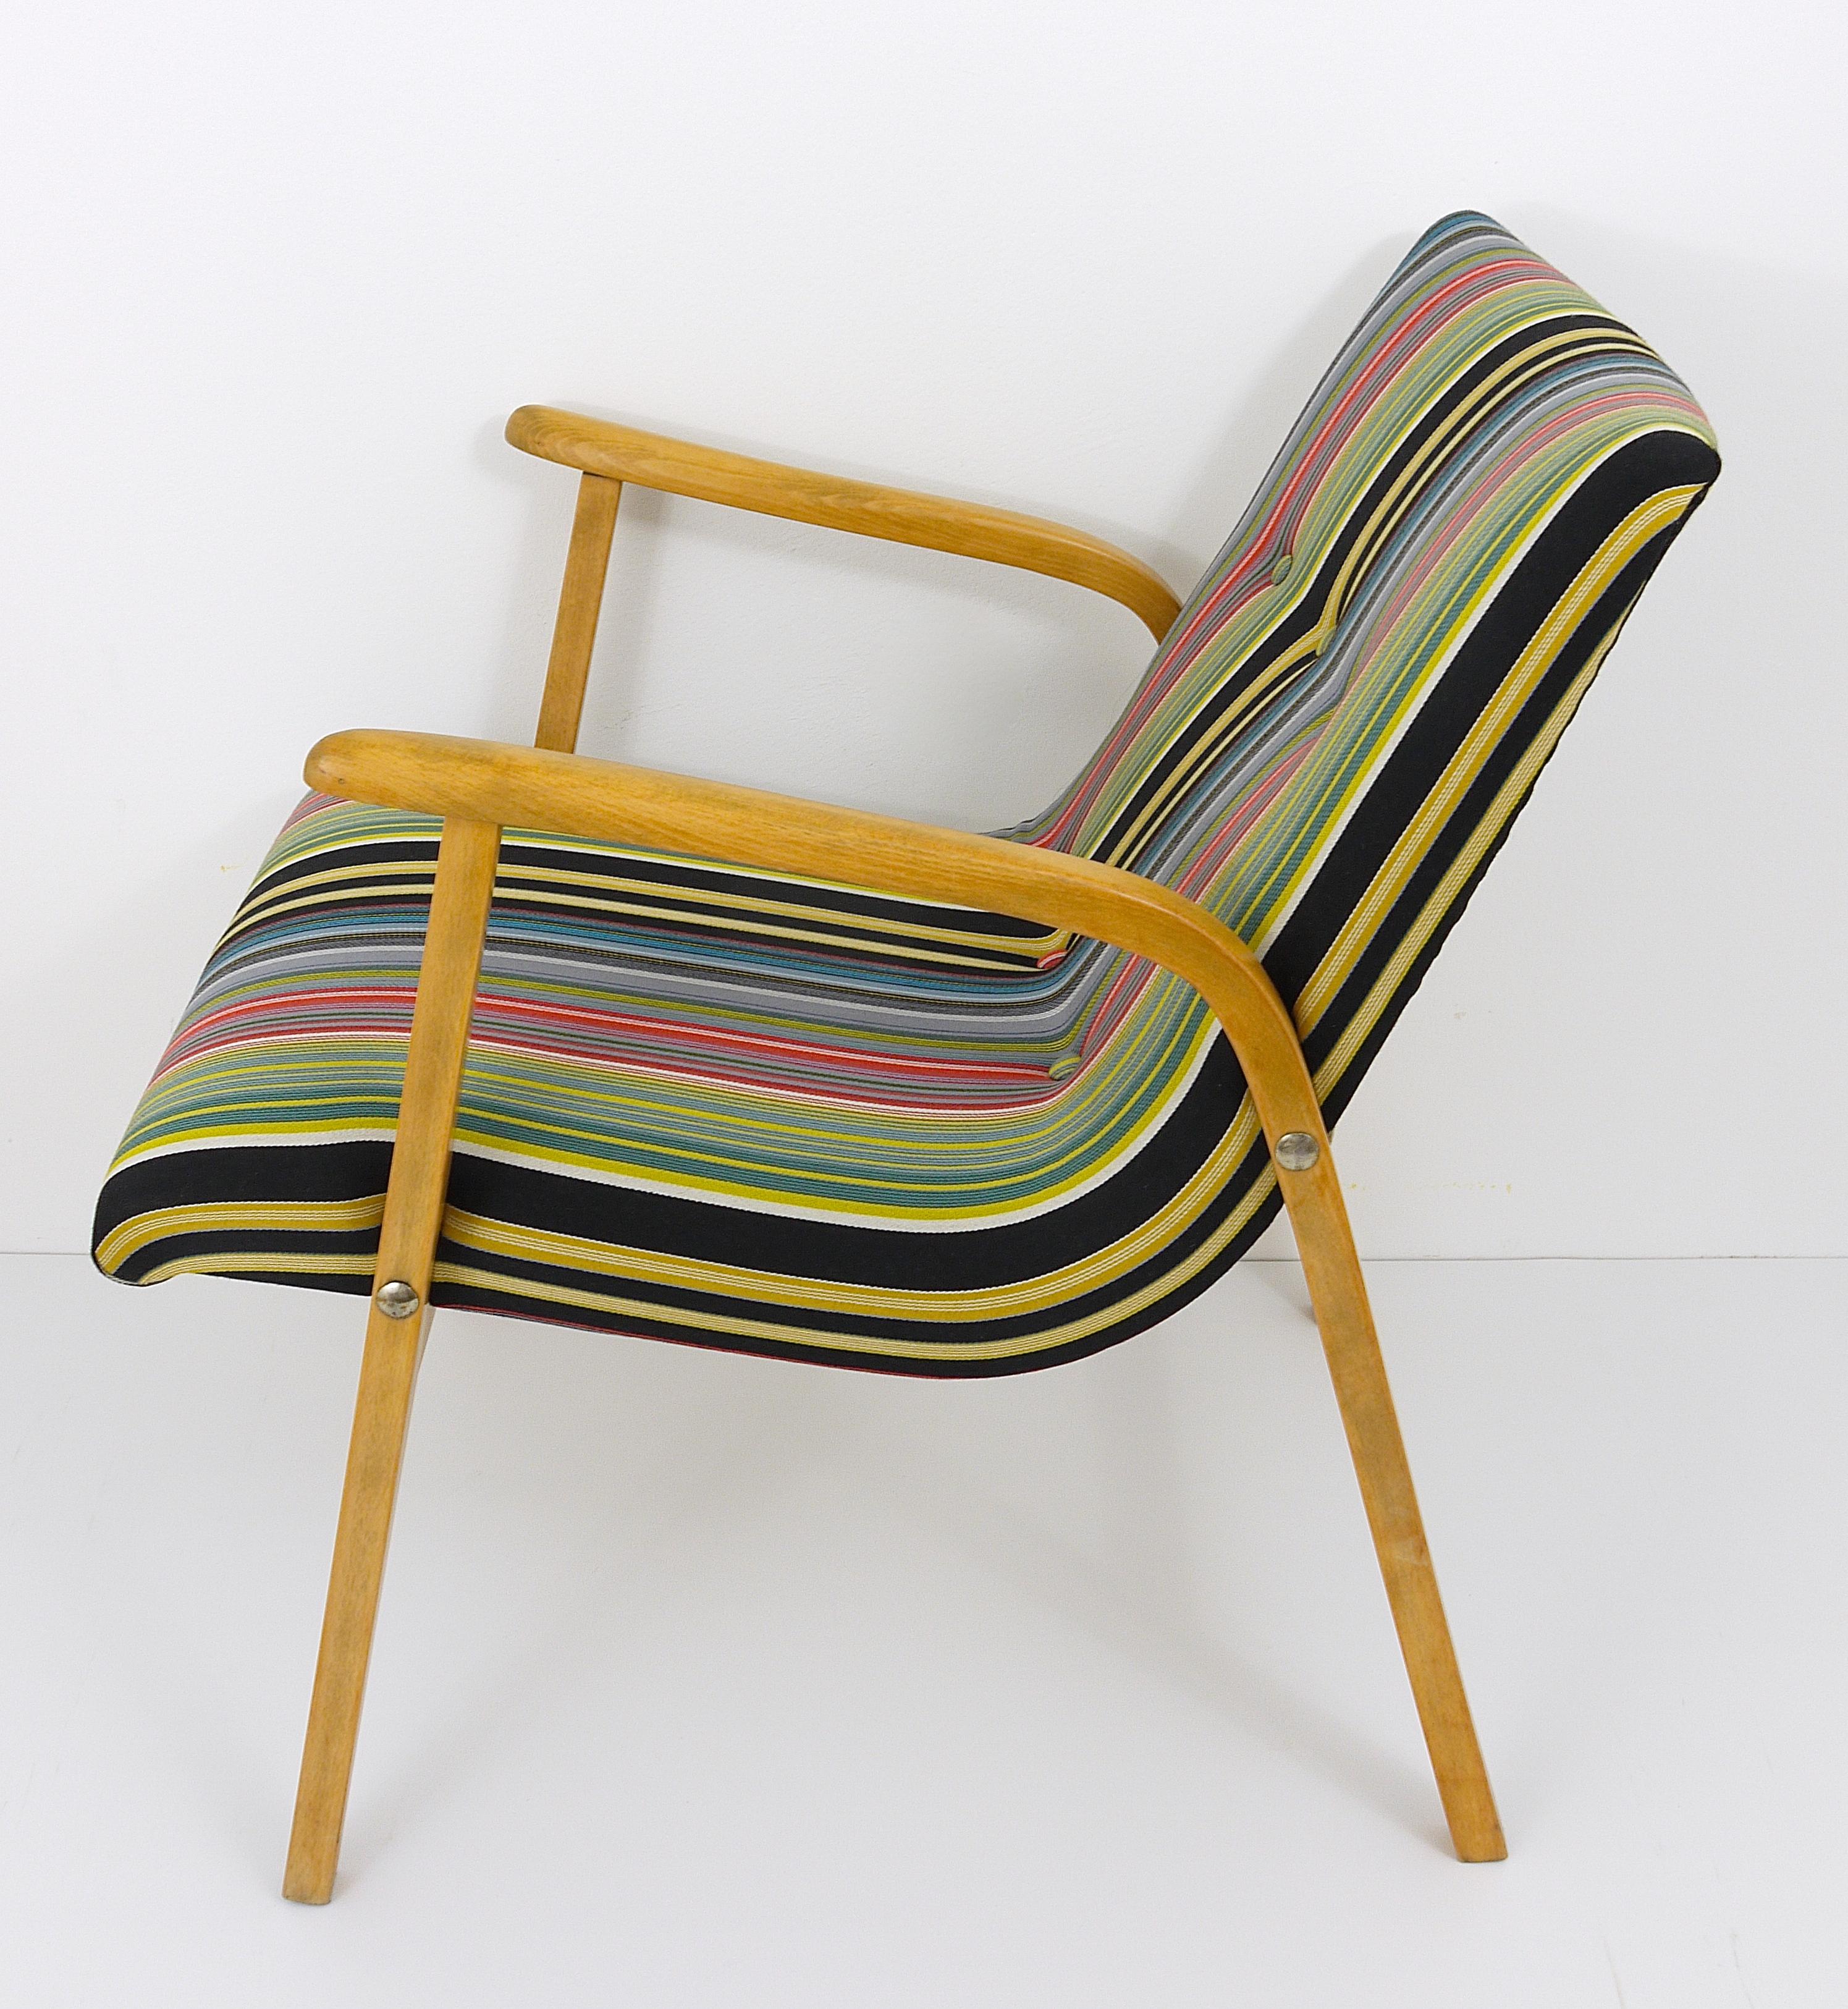 Austrian 1950s Roland Rainer Cafe Ritter Chair with Paul Smith Maharam Upholstery